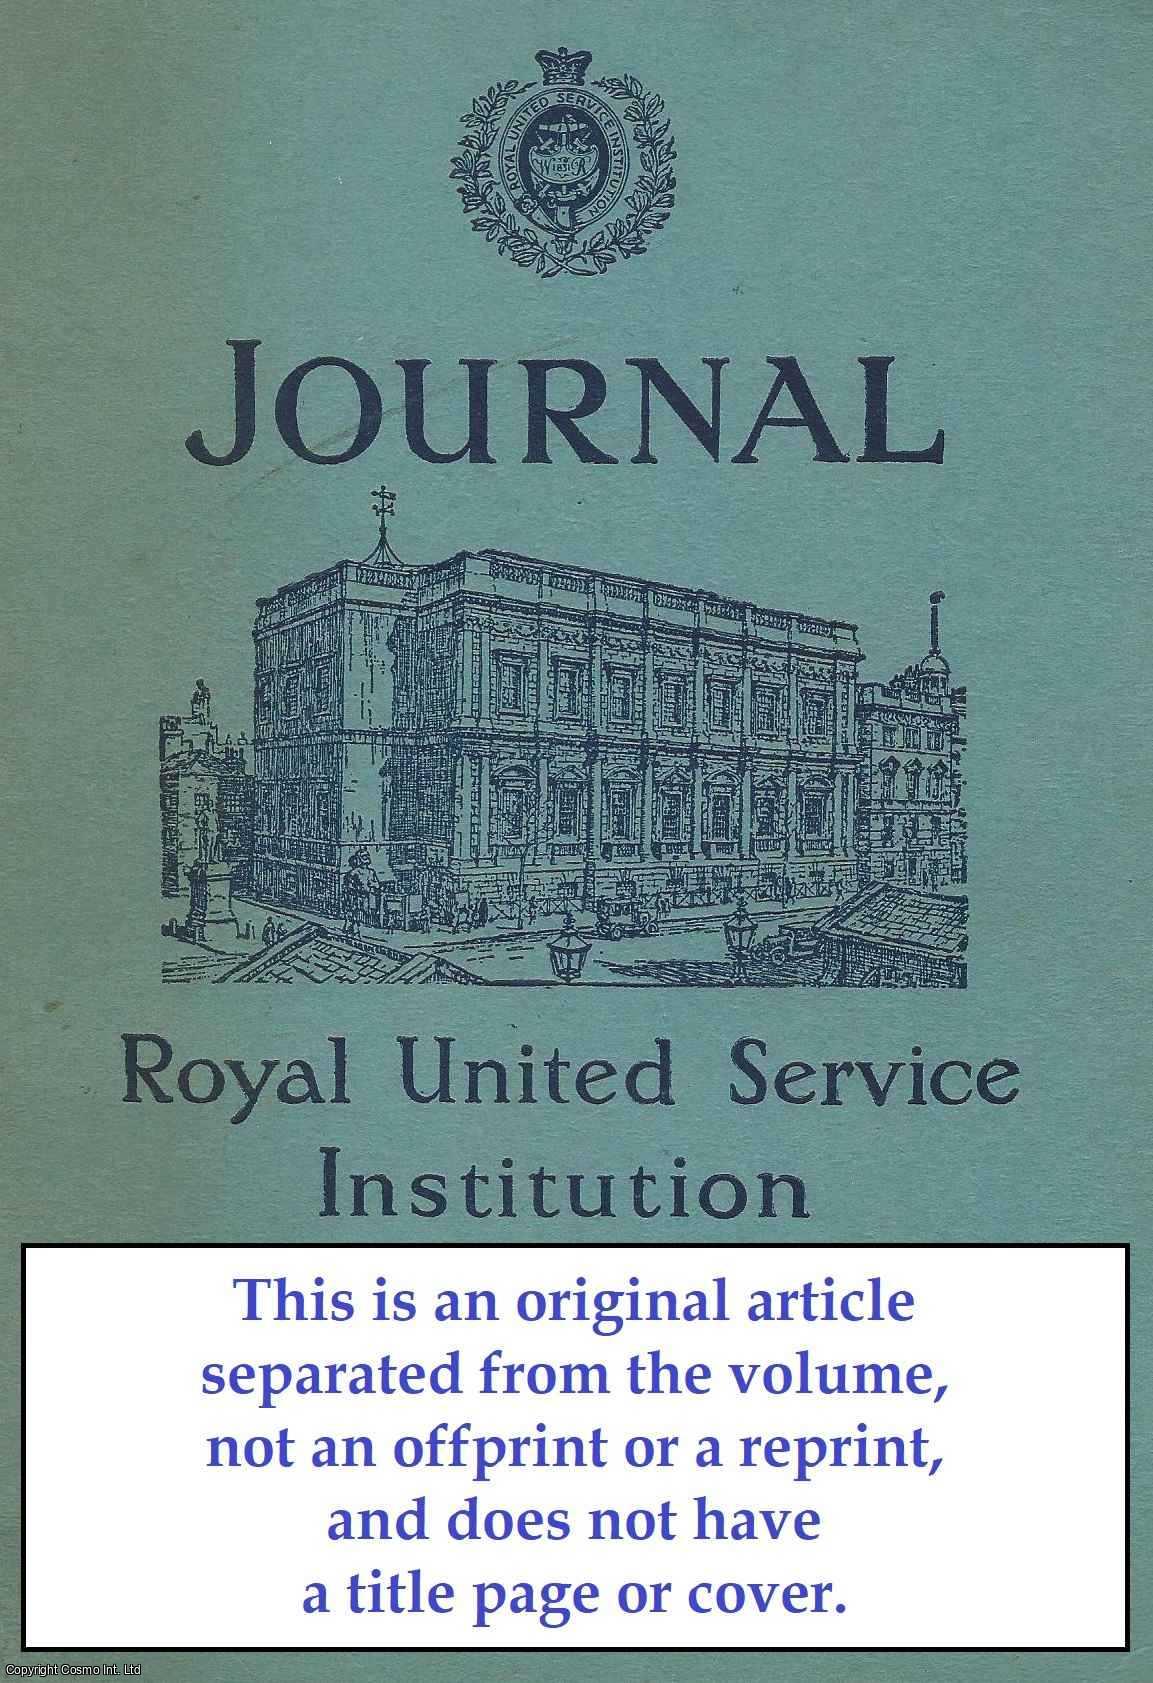 John Erickson - Sino-Soviet Relationships - III: The Question of Strategic Combination. An original article from Journal of The Royal United Service Institution, 1960.